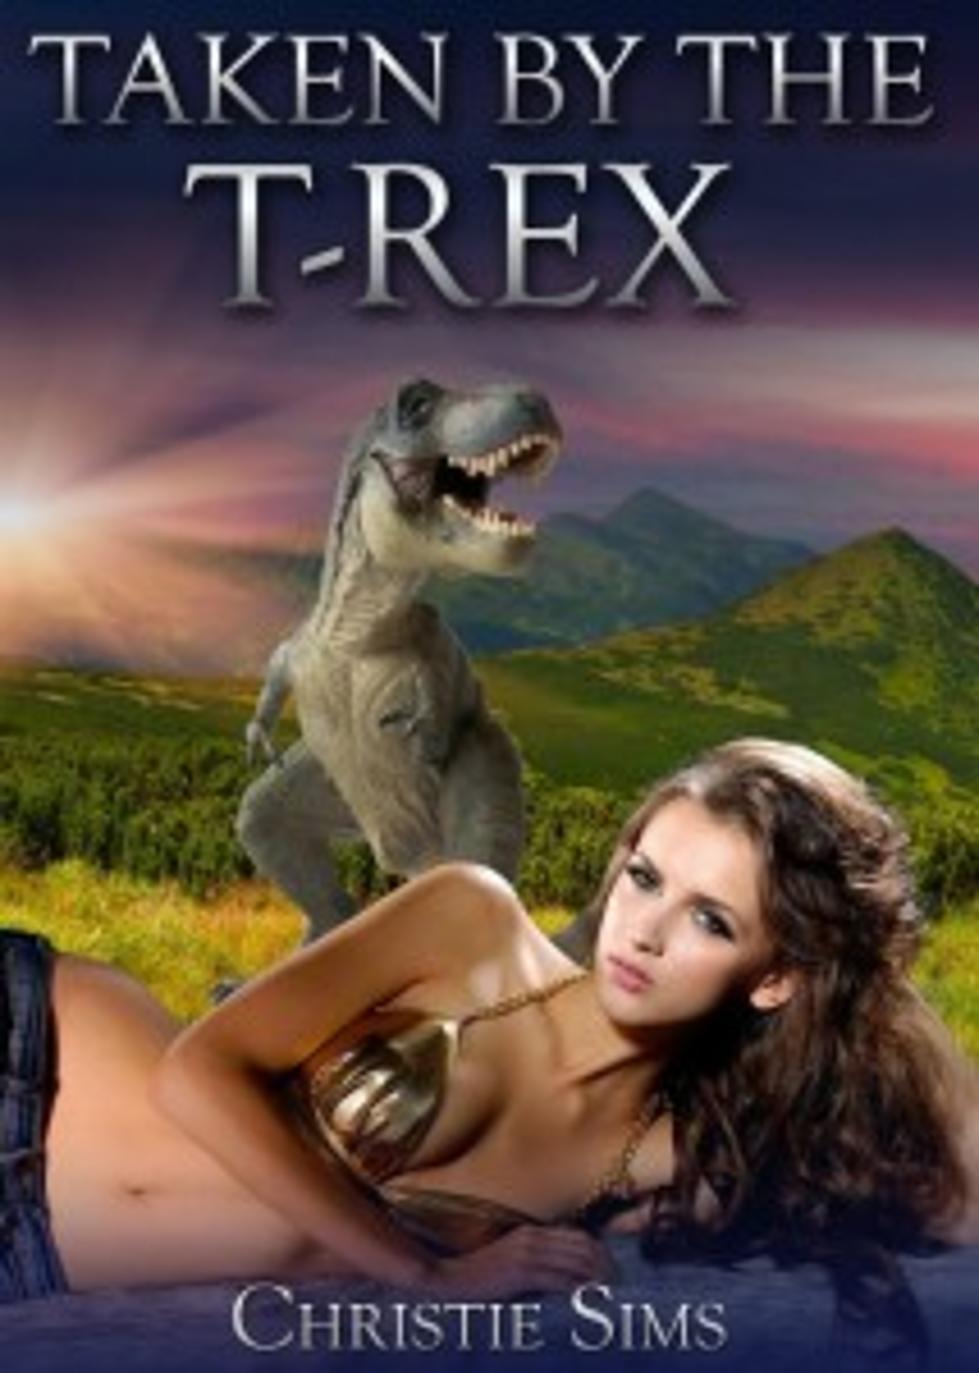 Dinosaur Erotica Will Either Turn You On Or Haunt Your Dreams (Or Both)